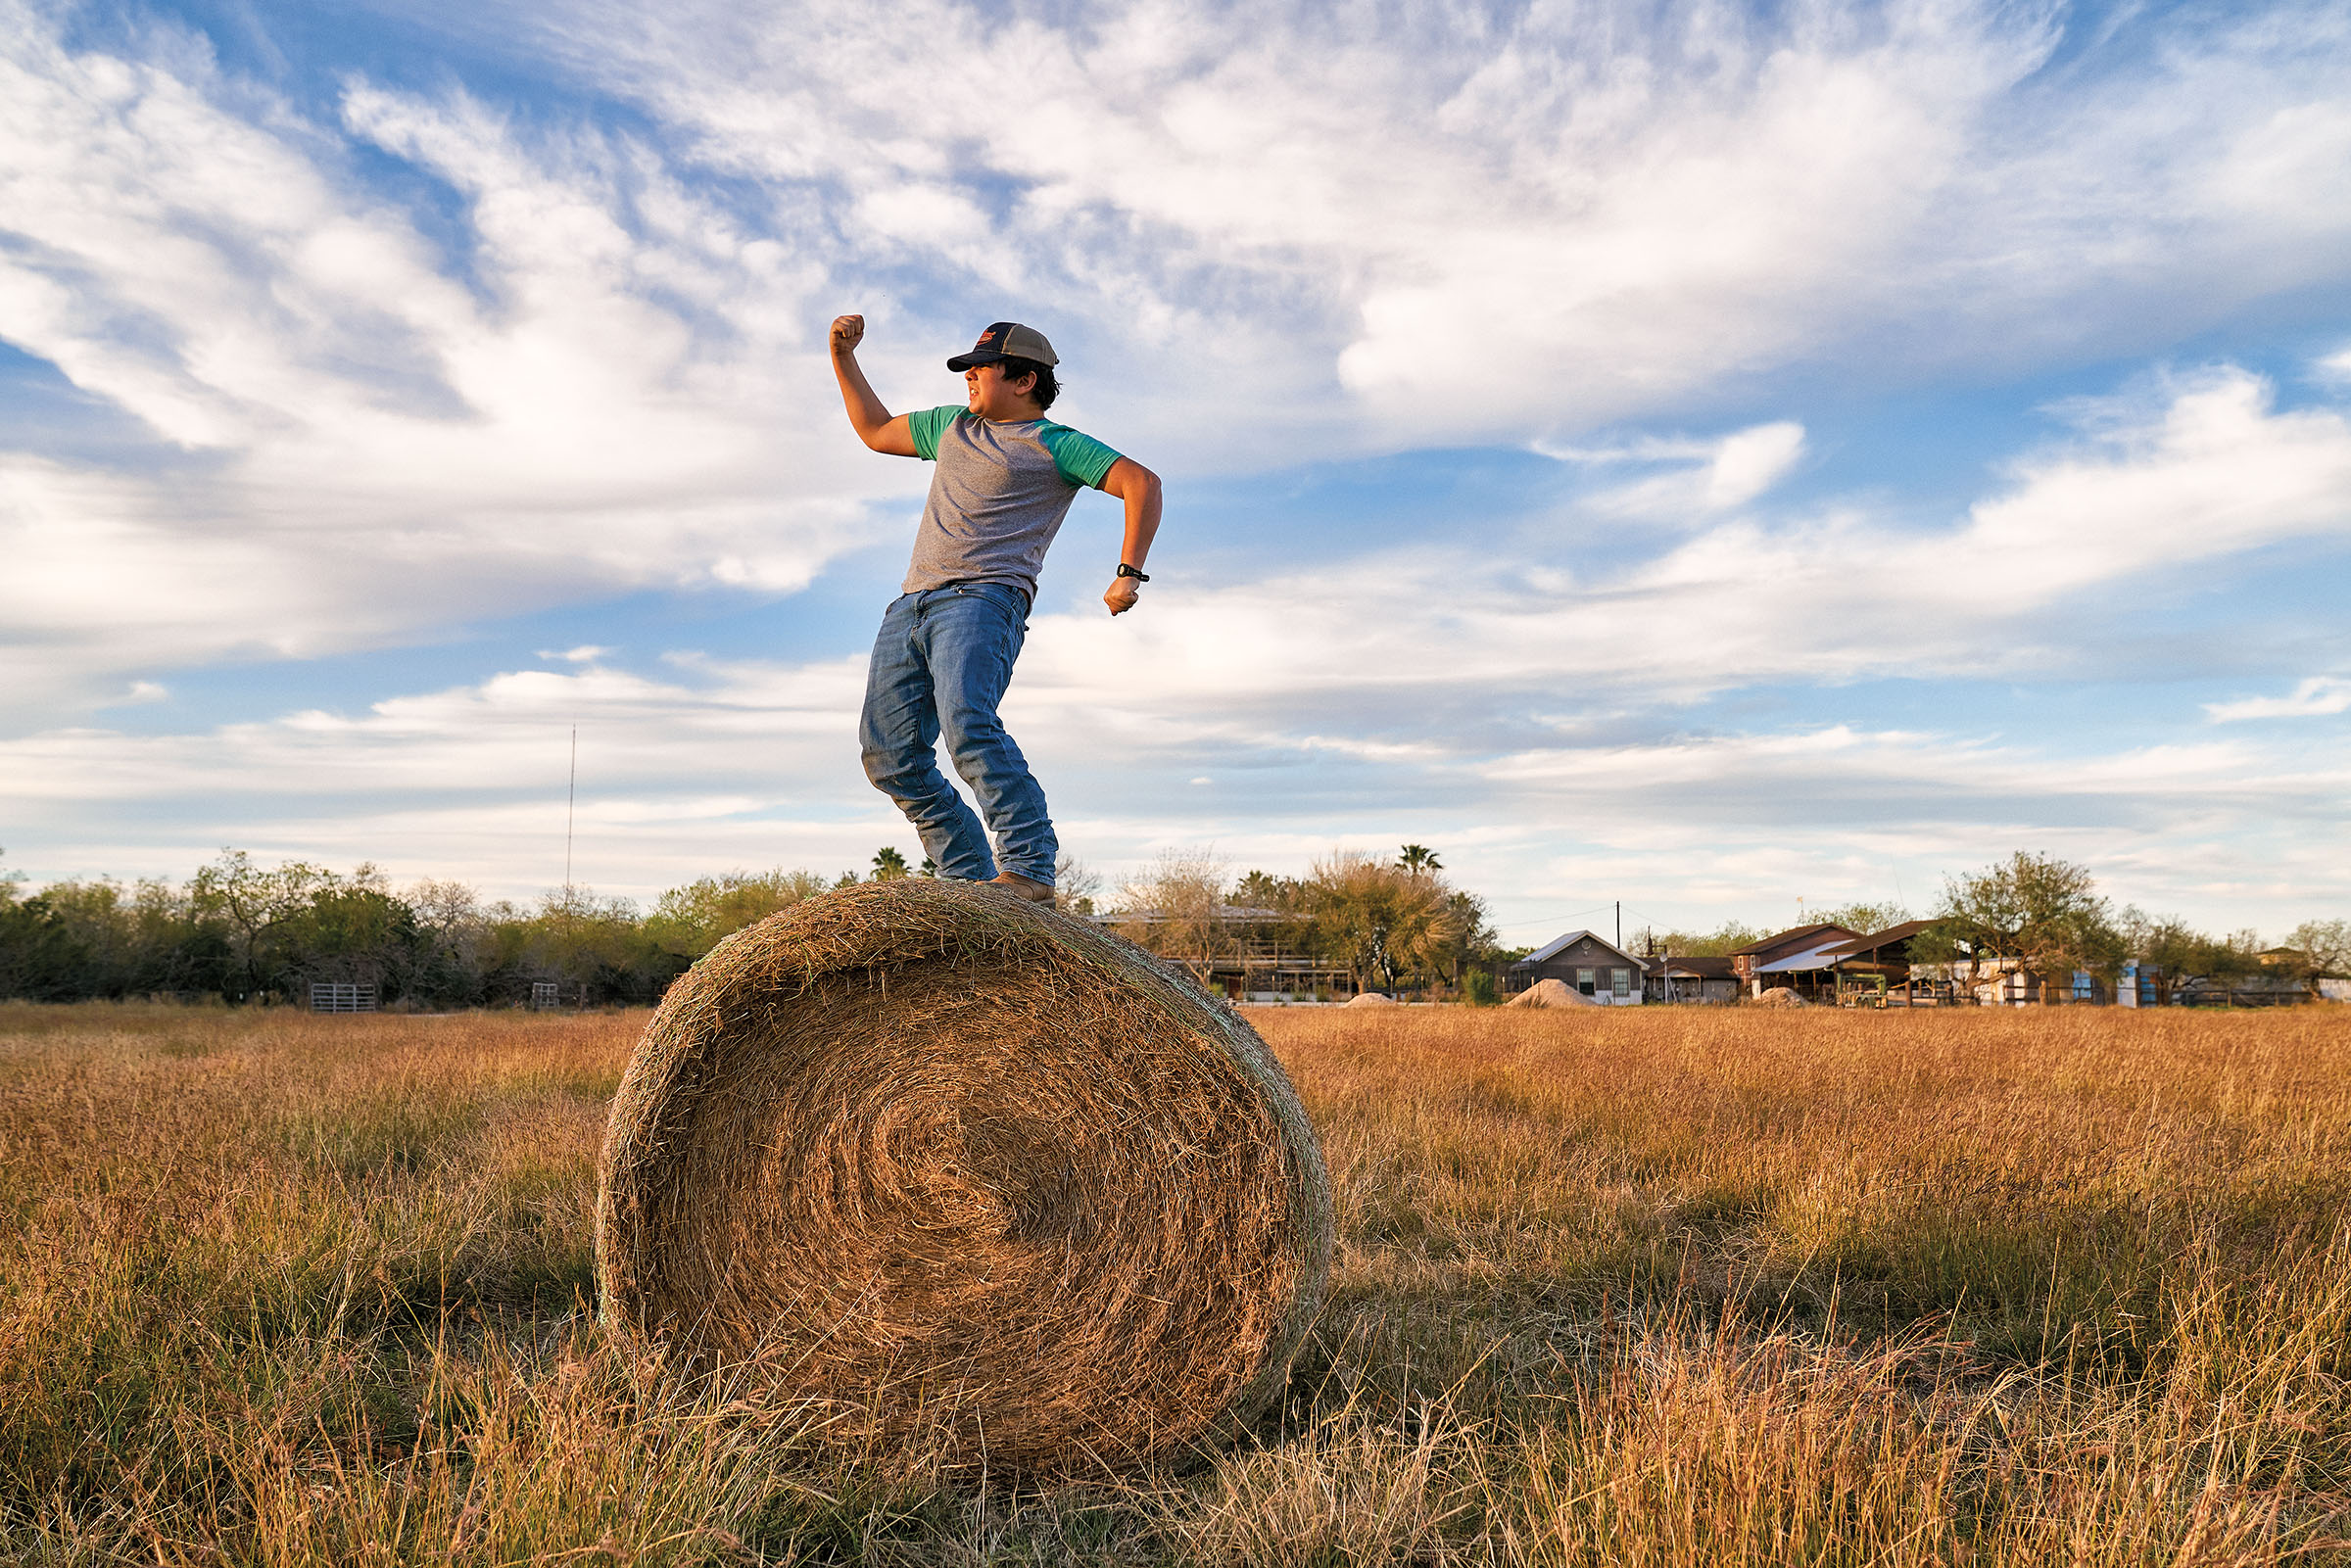 A young man in a t-shirt and jeans stands on a large circular haybale